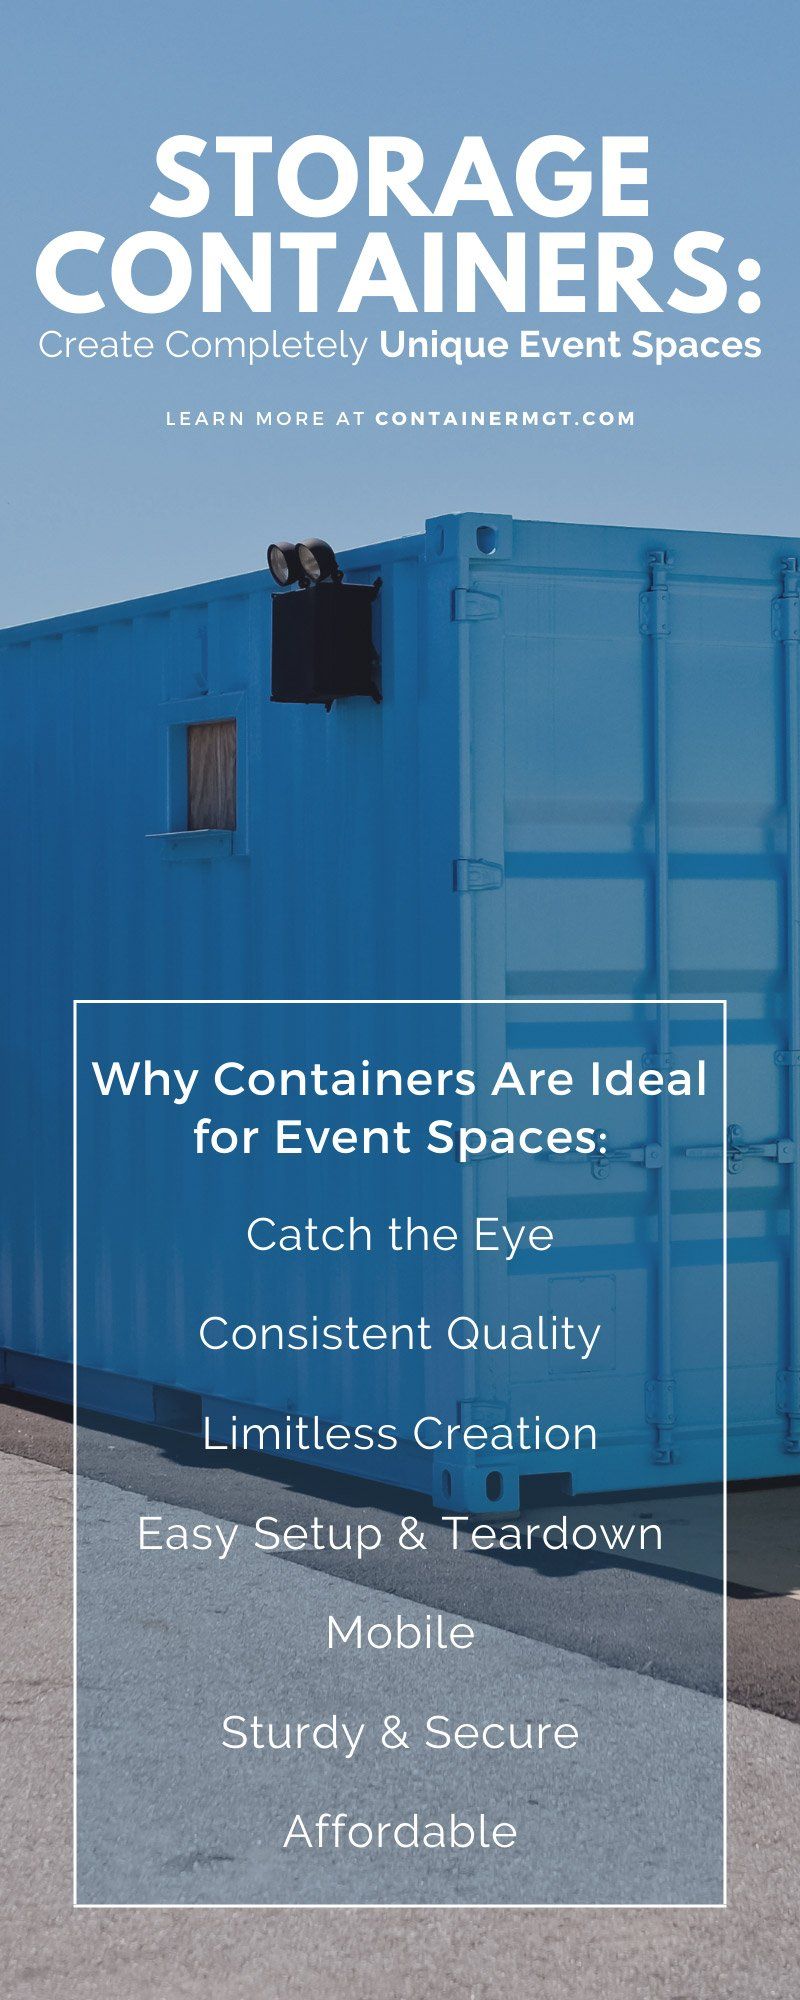 Storage Containers: Create Completely Unique Event Spaces